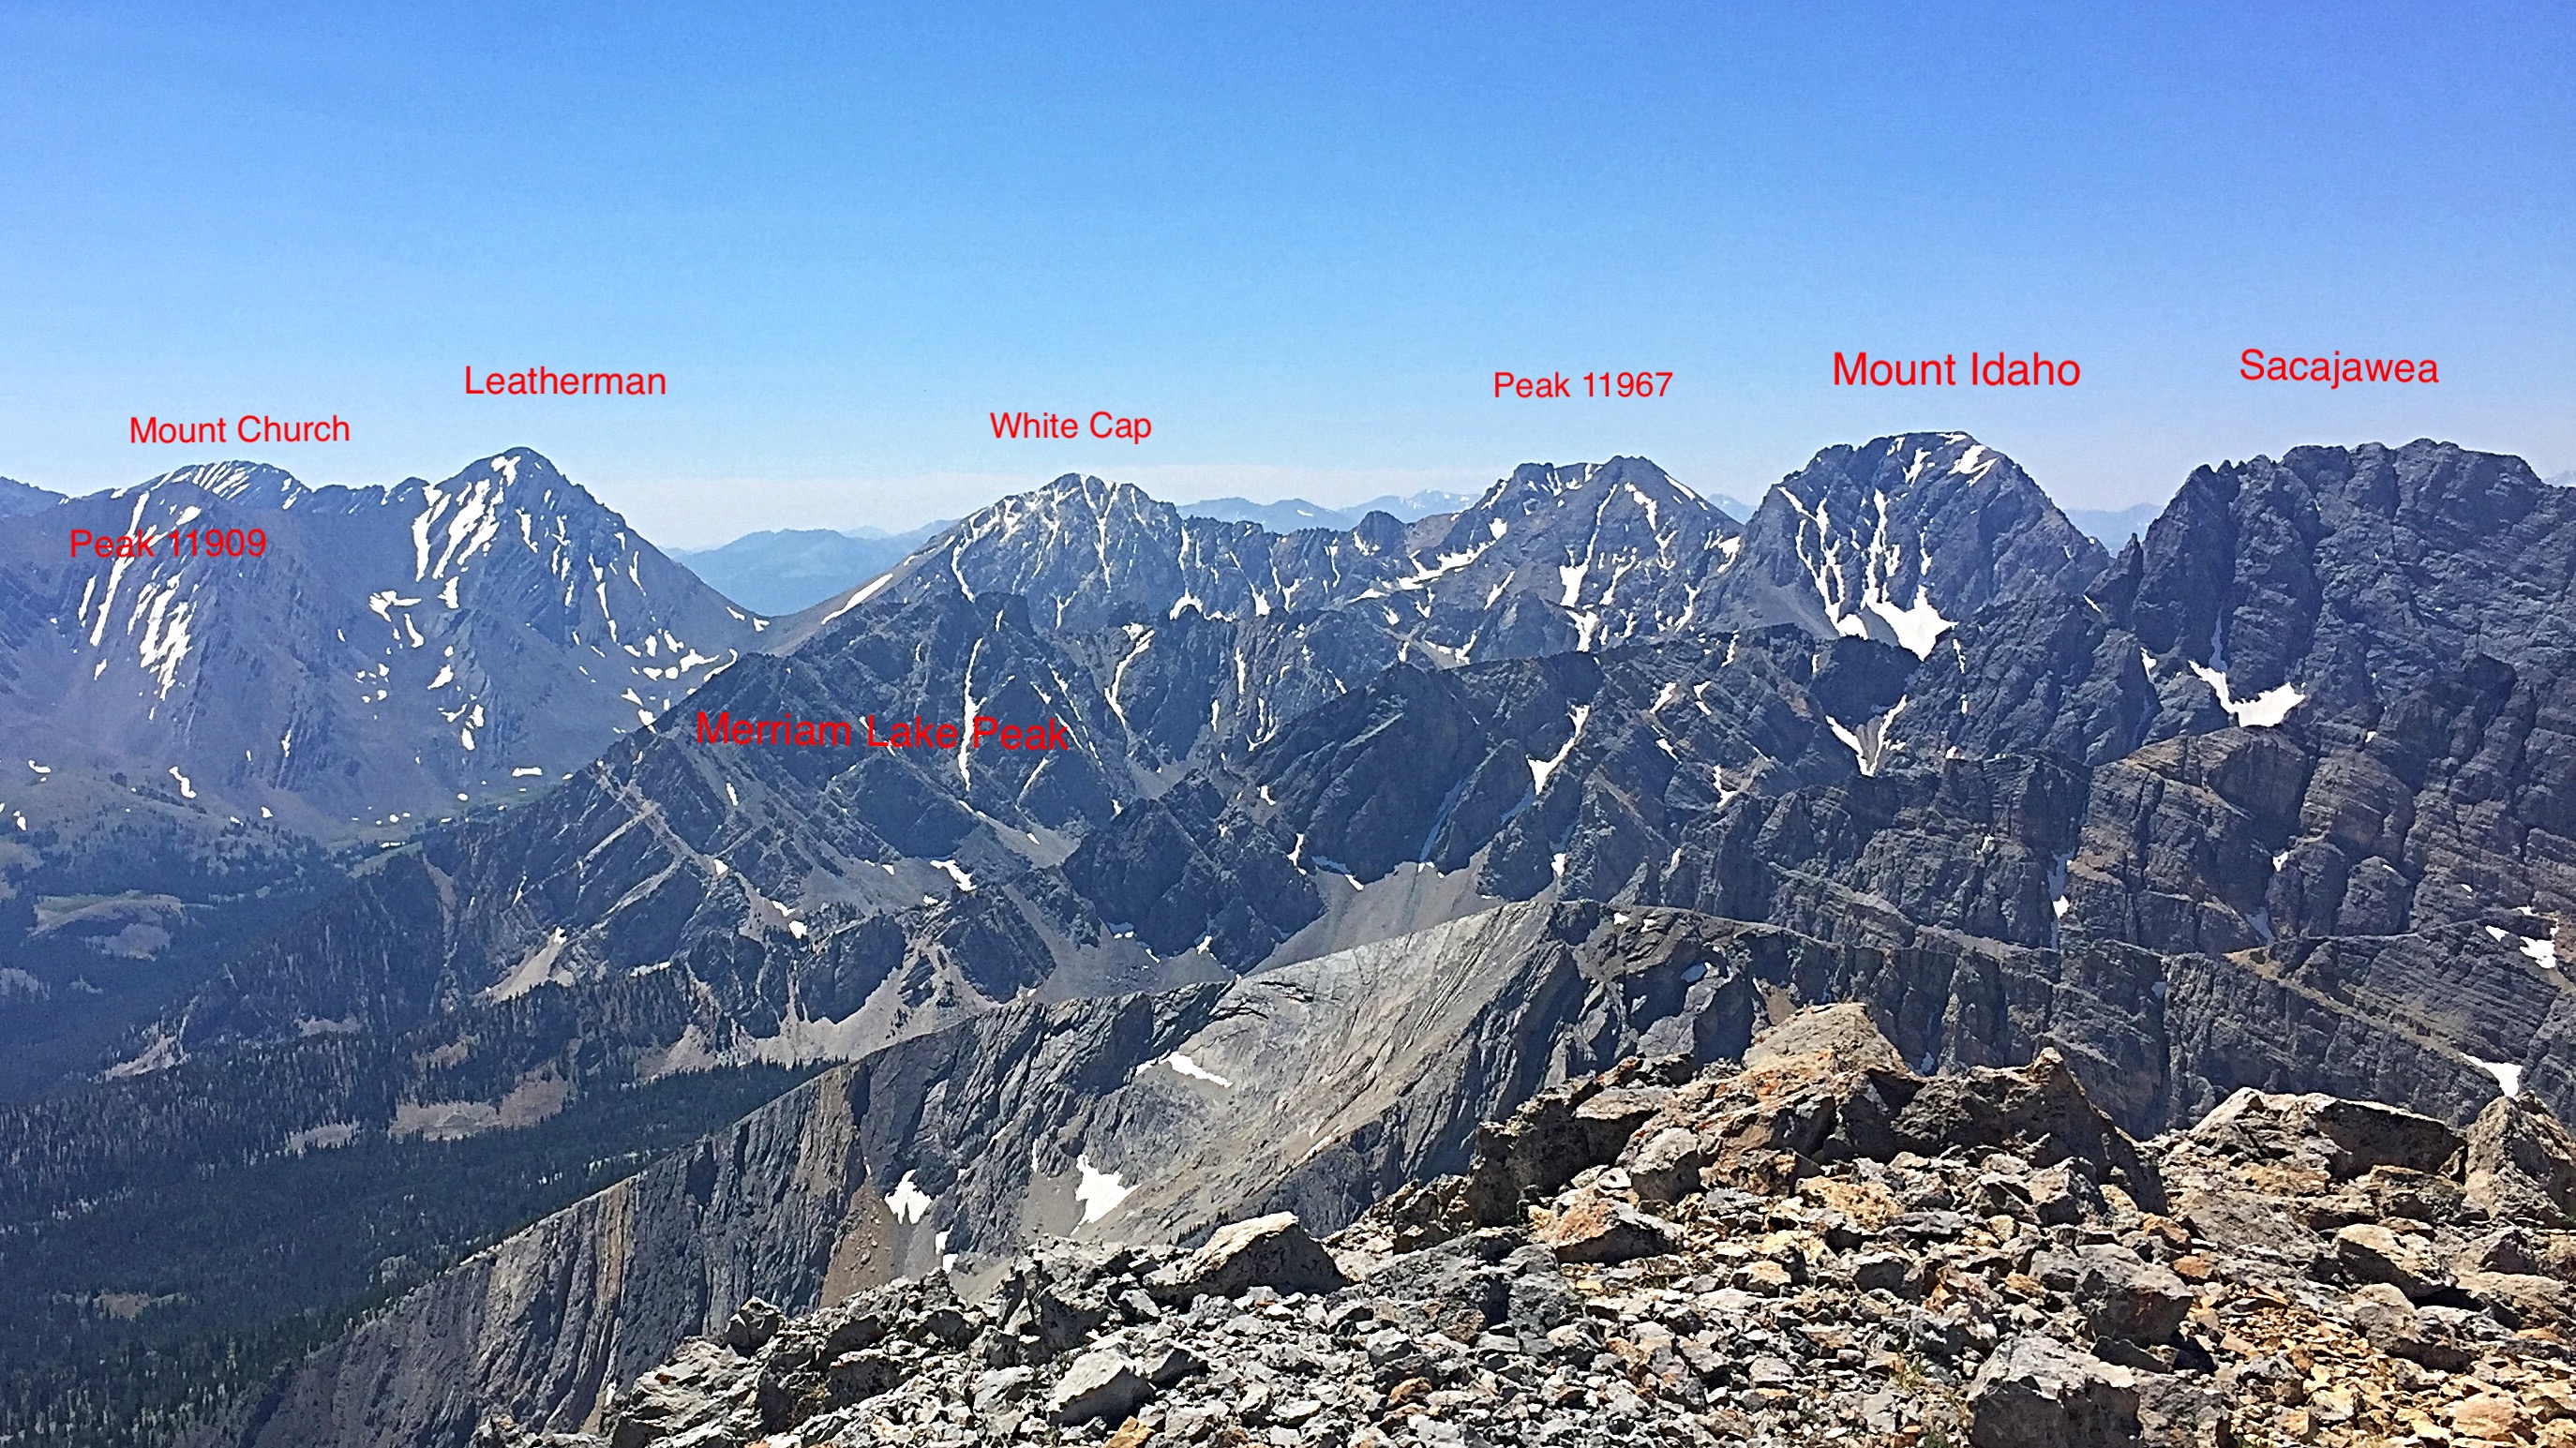 The main Lost,River Range crest viewed from Mountaineers Peak.